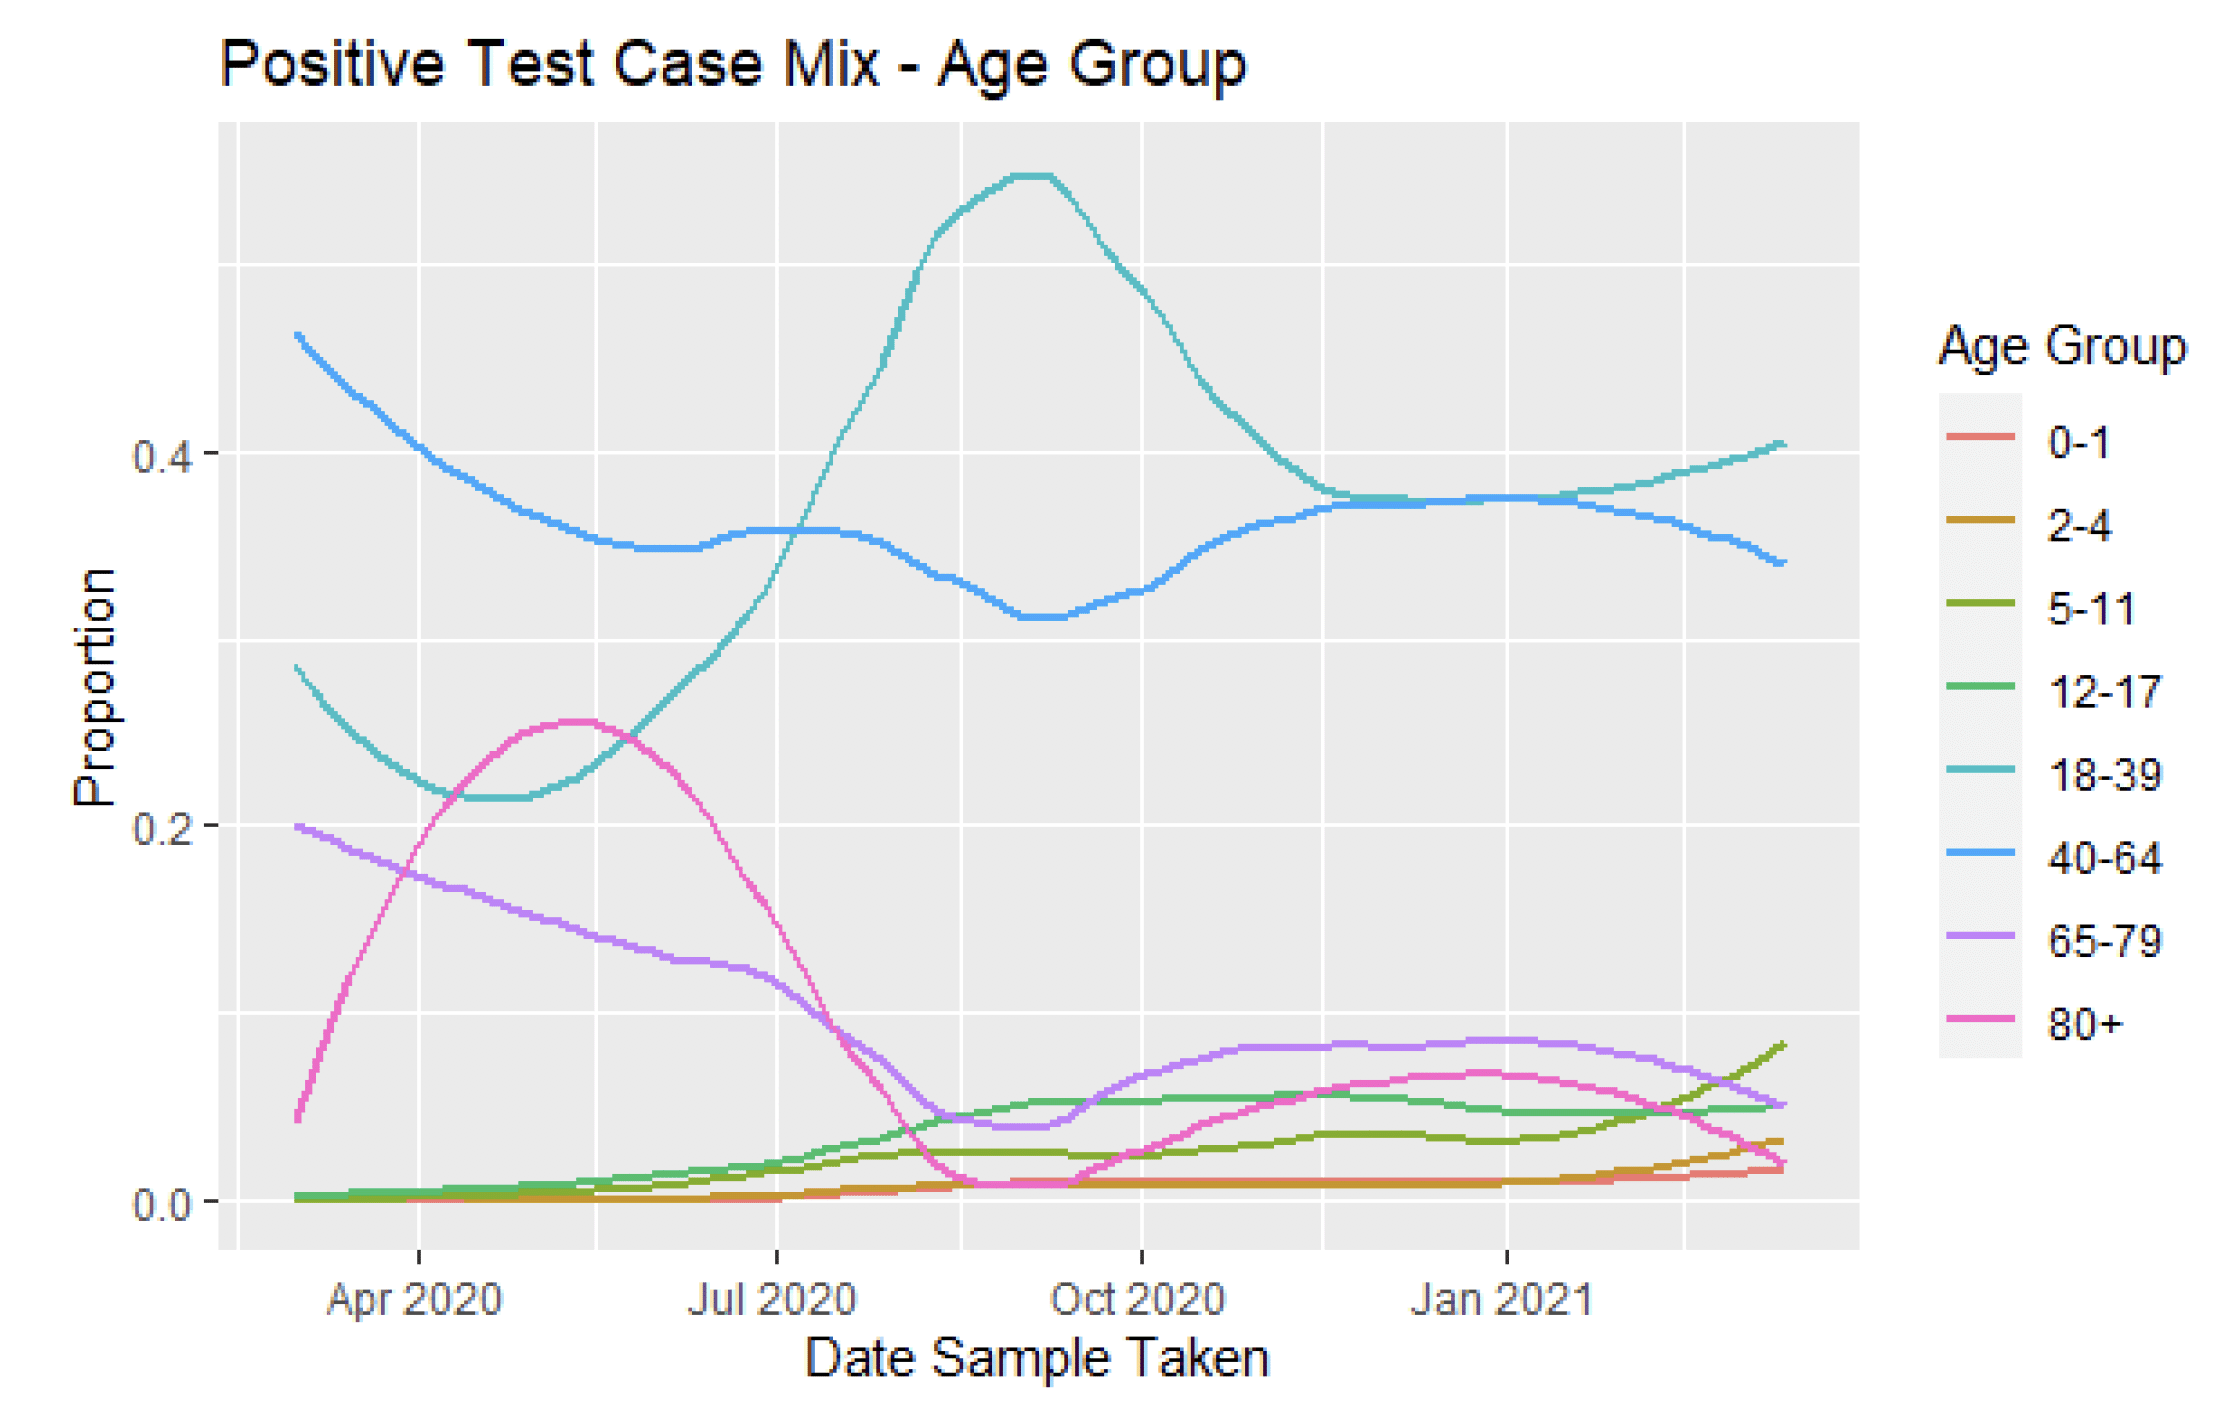 Proportion of positive tests, by age group, from March 2020 to March 2021.